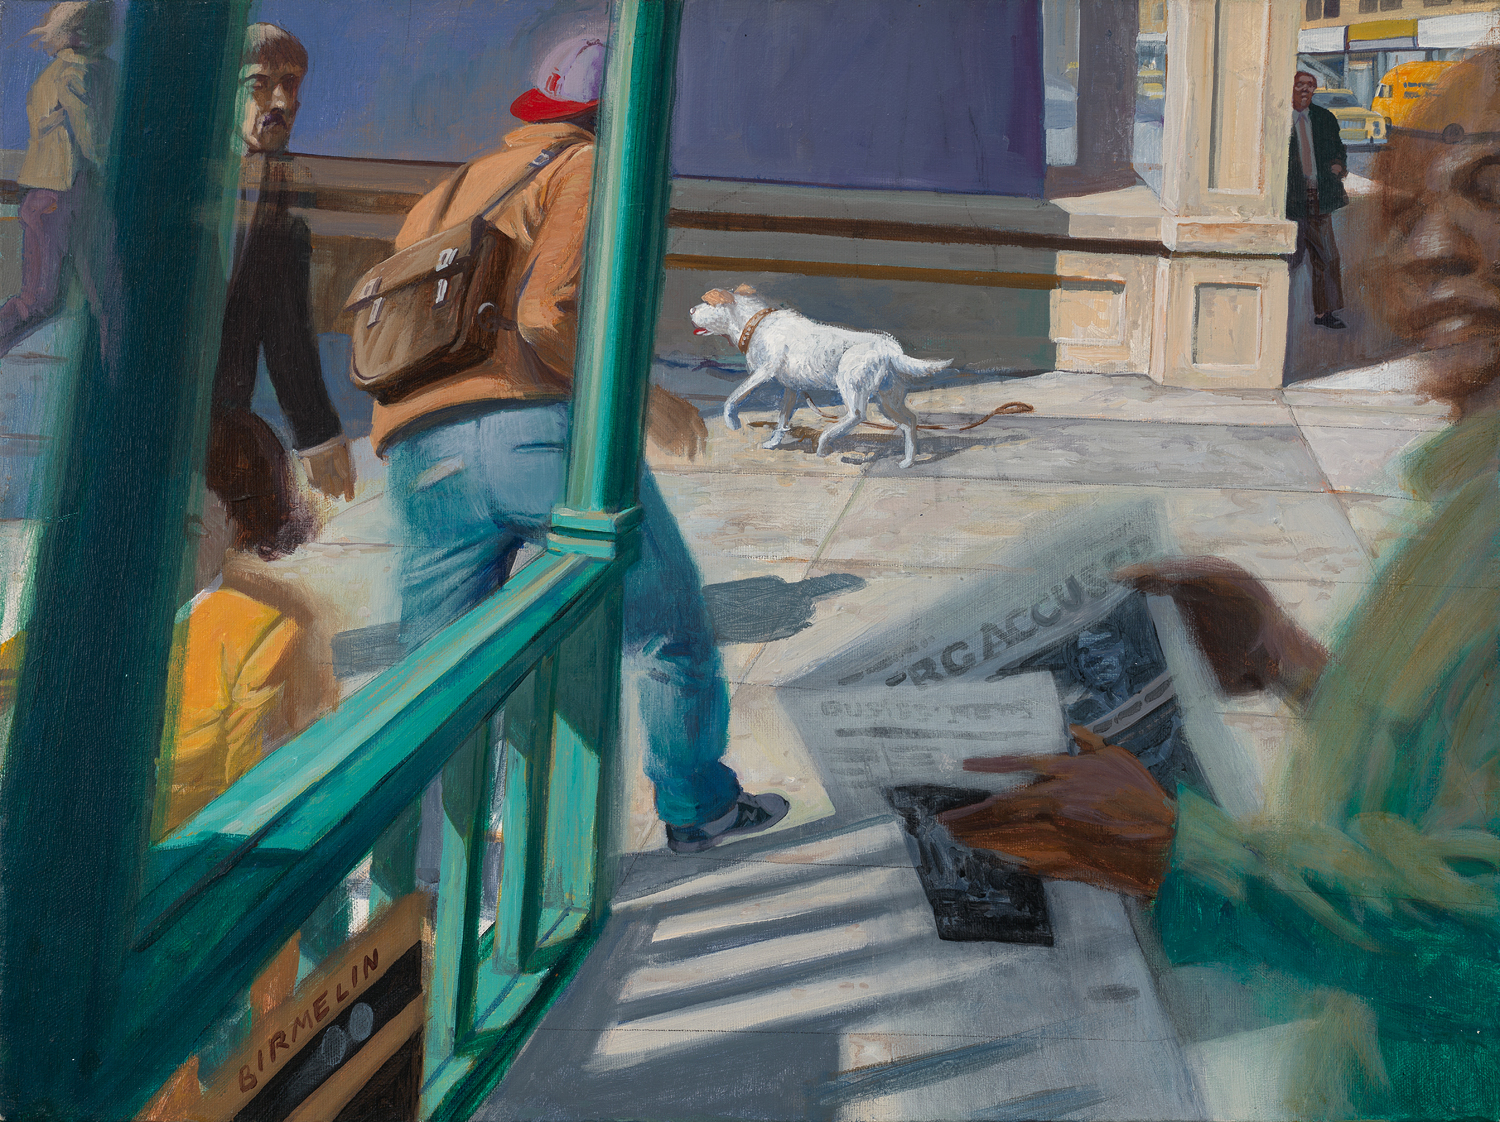 People hurry up the steps of a subway station while a man reading the newspaper turns as if the viewer had asked him a question, all while a white dog passes by.